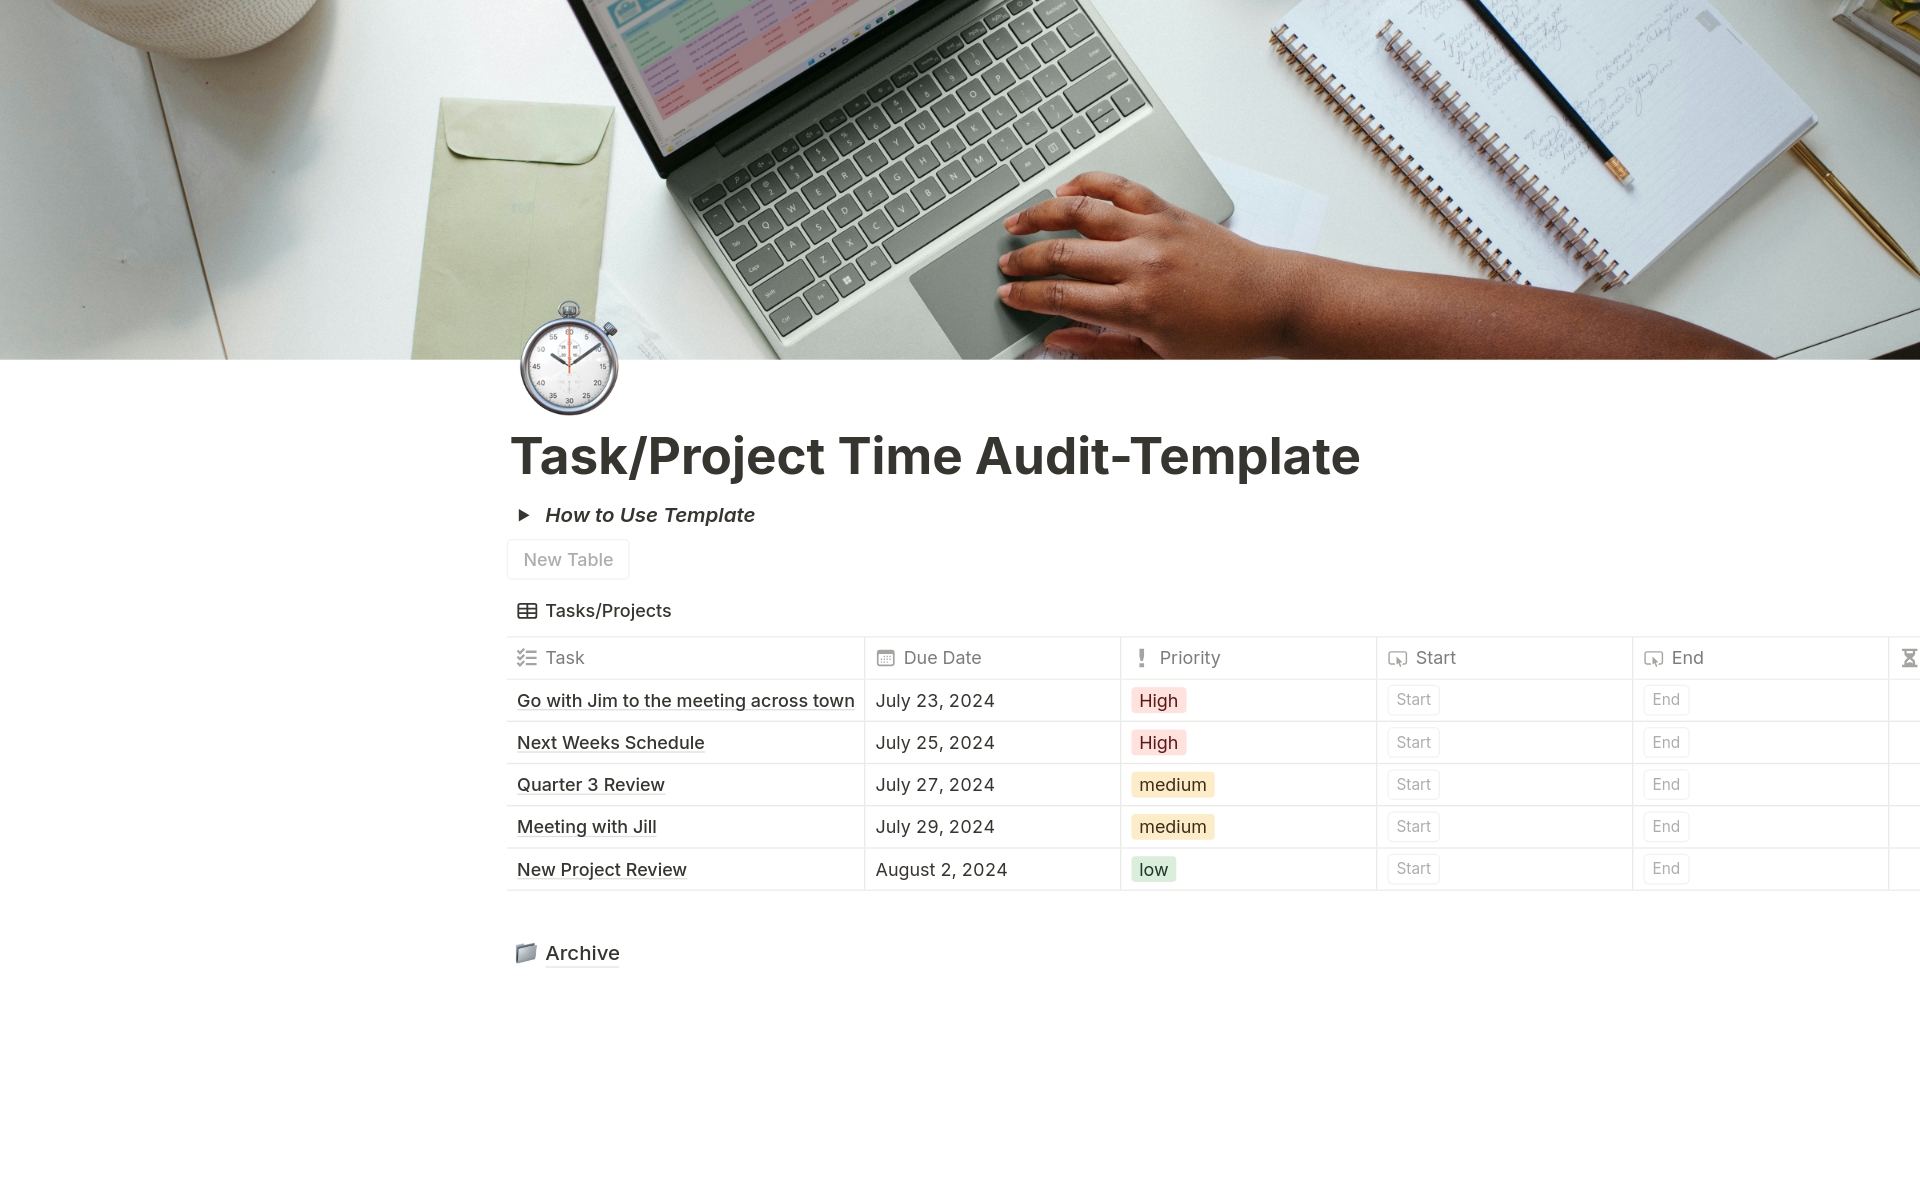 Tracker important tasks and projects and the time it takes to complete them with the time tracker function, designed for efficiency and accuracy. Help track and manage your time.